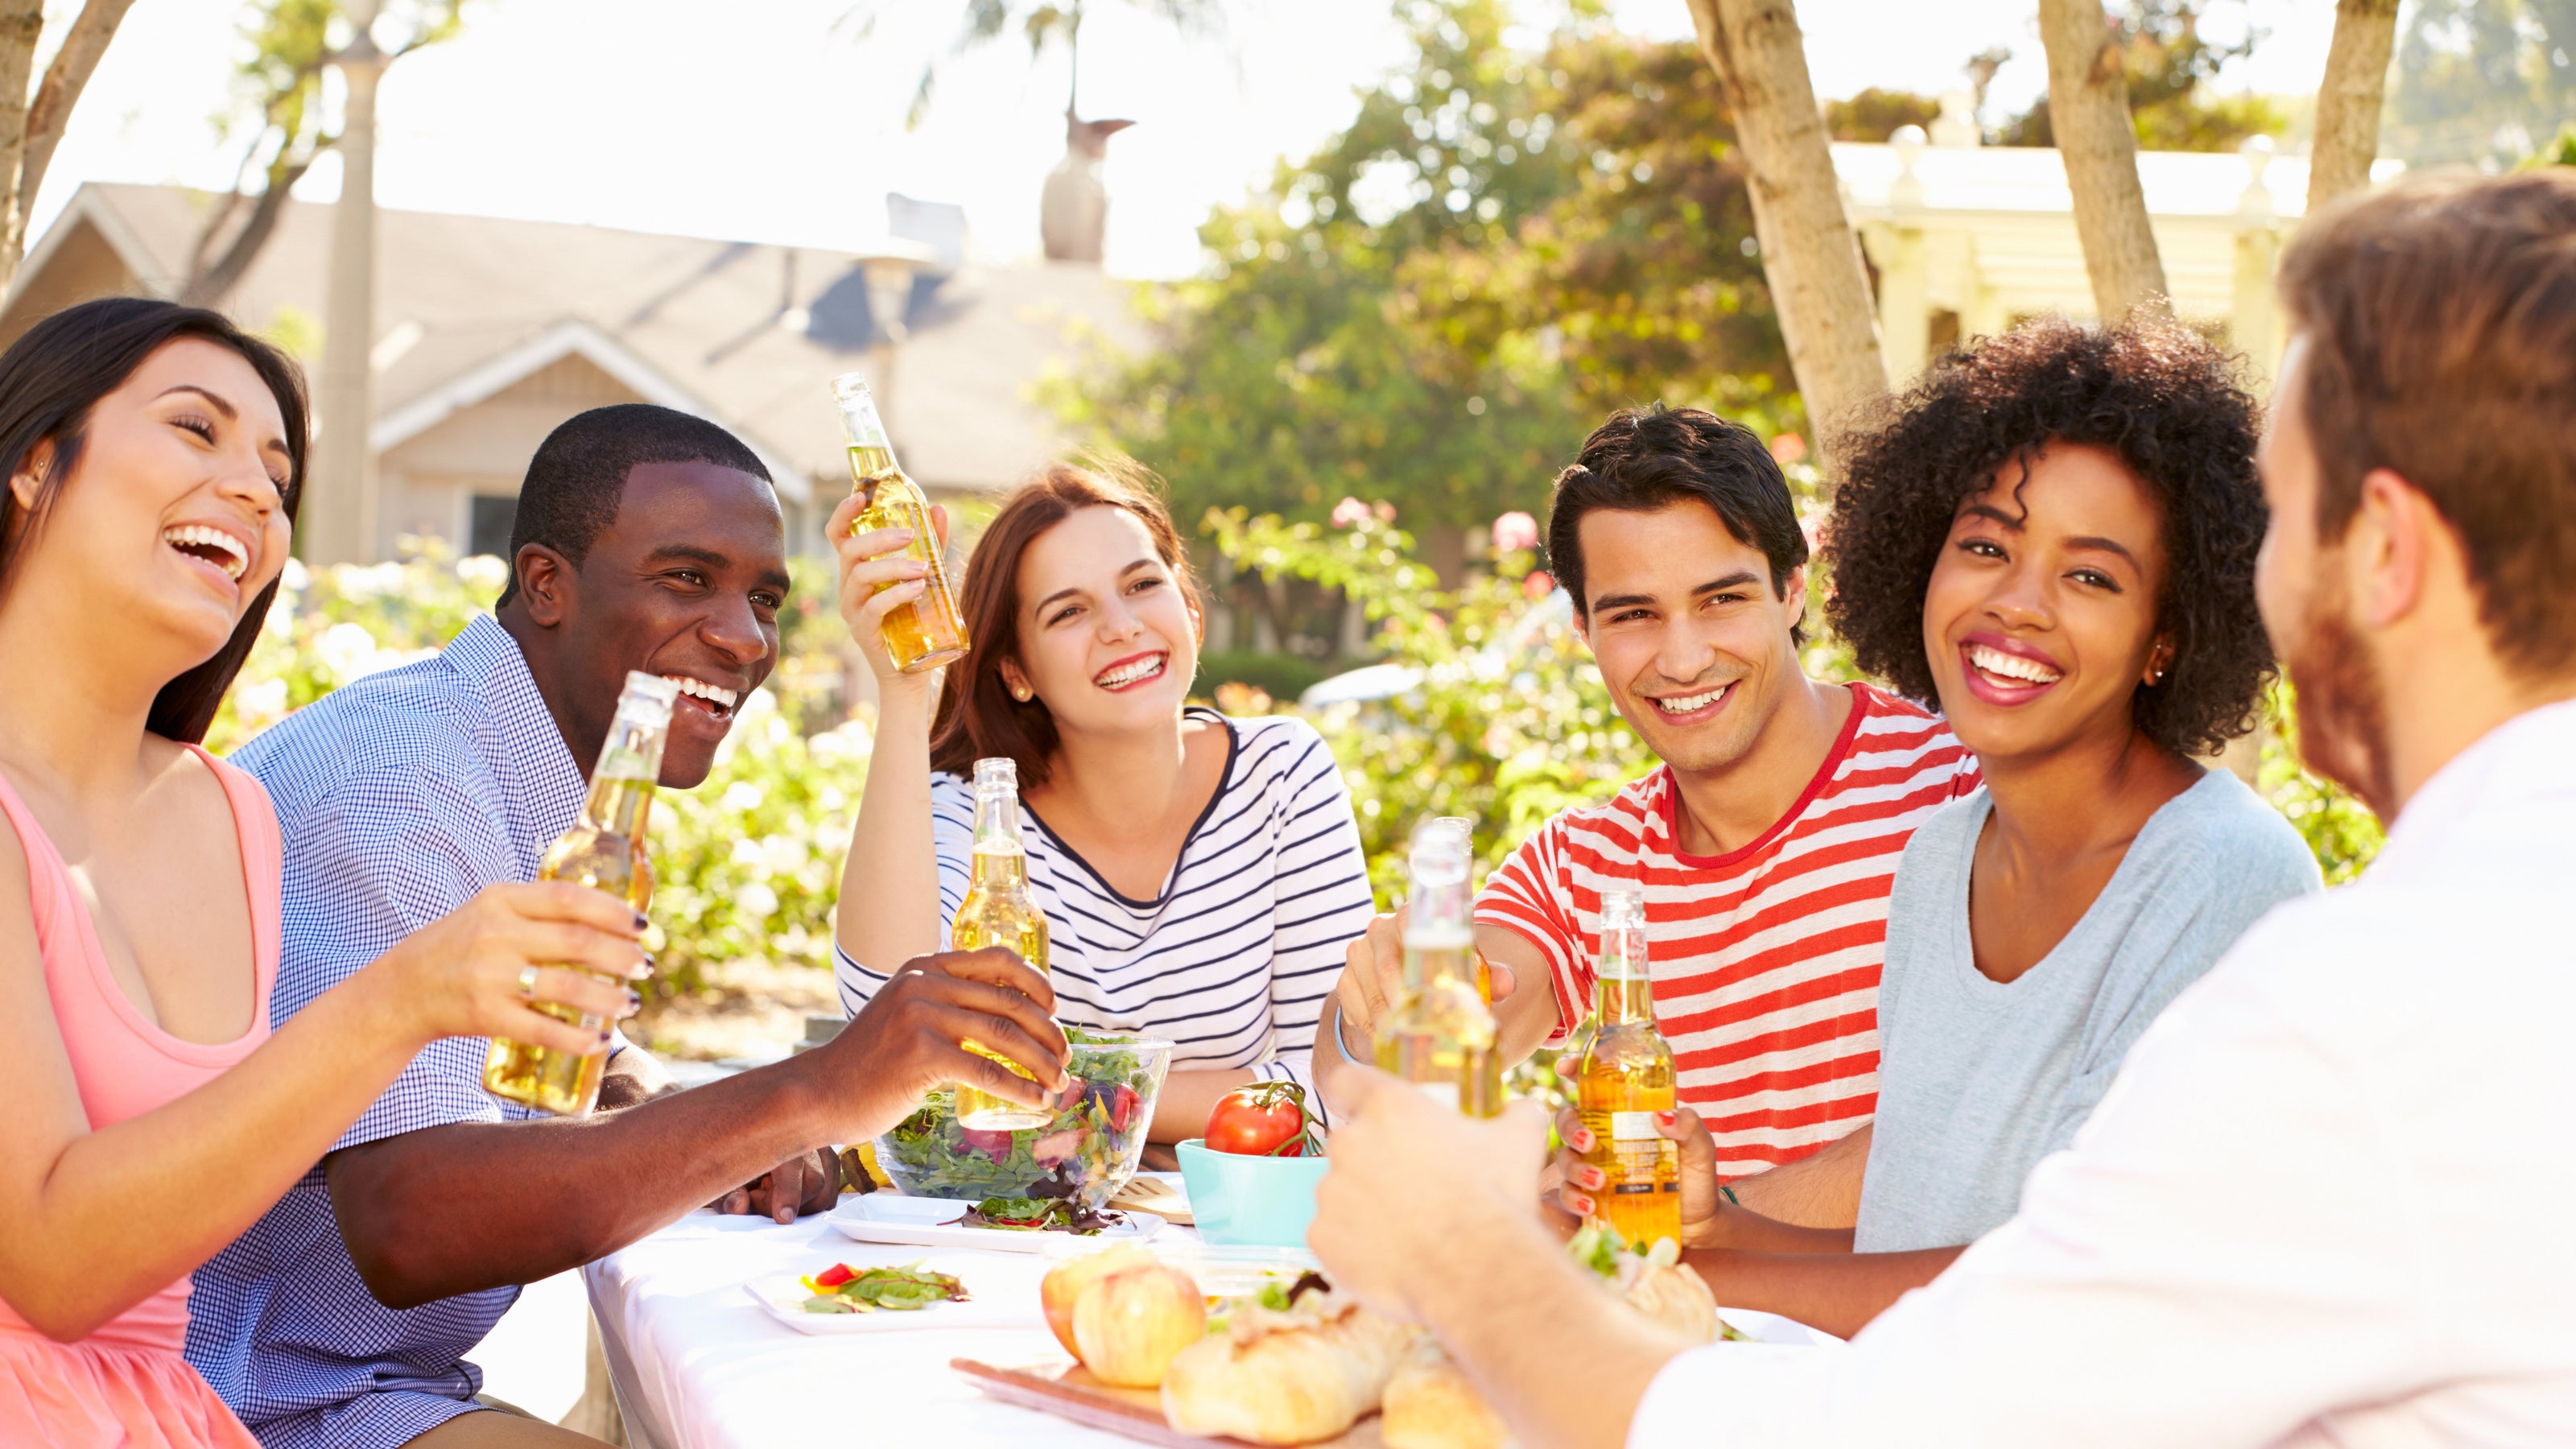 10 Tips to Throw a Last-Minute Labor Day Party (That Isn’t Too Laborious)